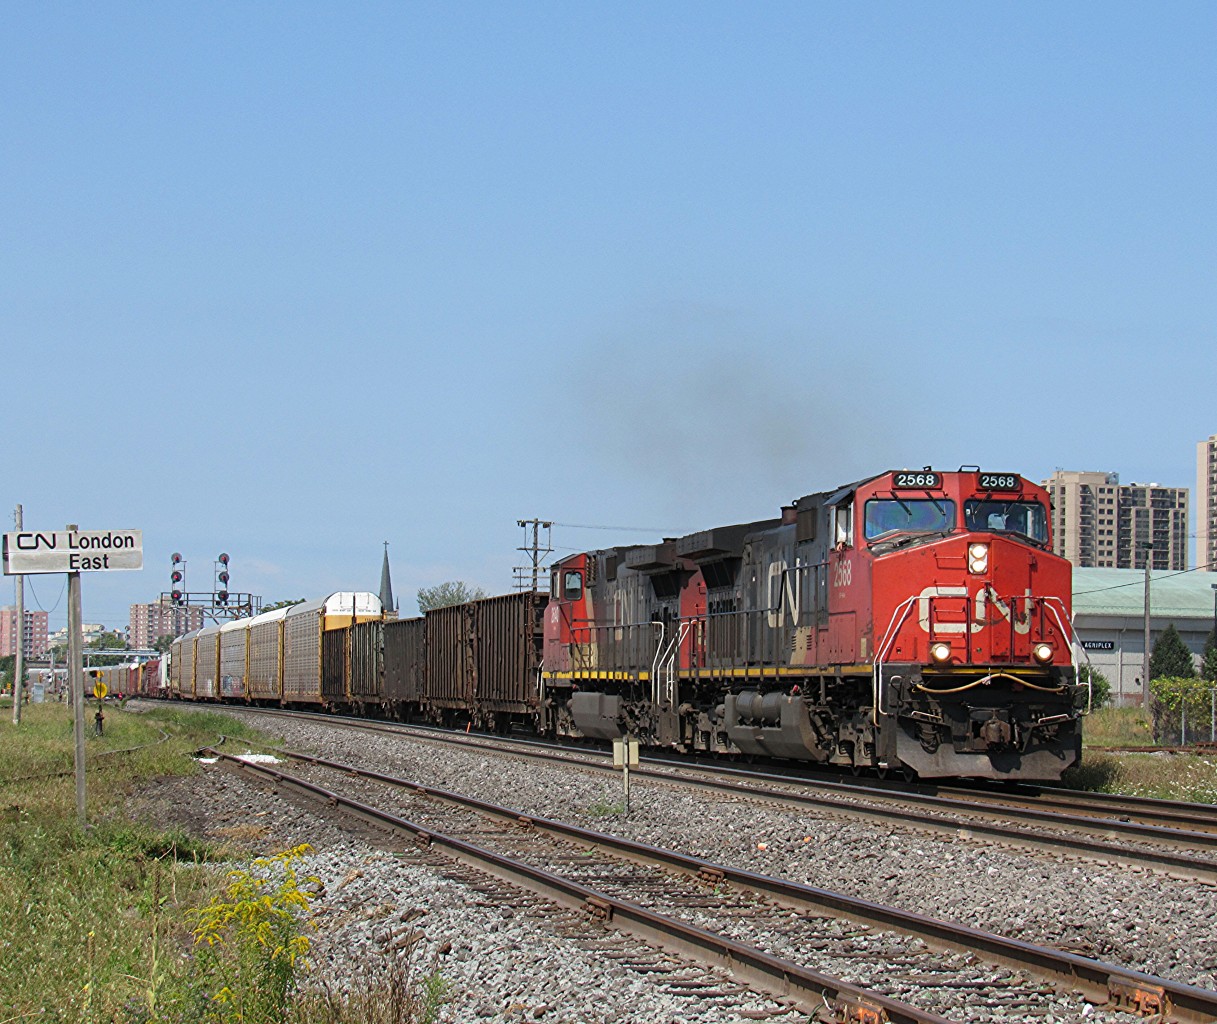 Canadian National eastbound mixed freight, M384, is a little late this morning. Usually arriving in London around the 7 to 10 AM time, this was nearing the lunch hour. During the 13th of August, most eastbound CN freights were quite late. Not exactly sure why, but it happens here and there.